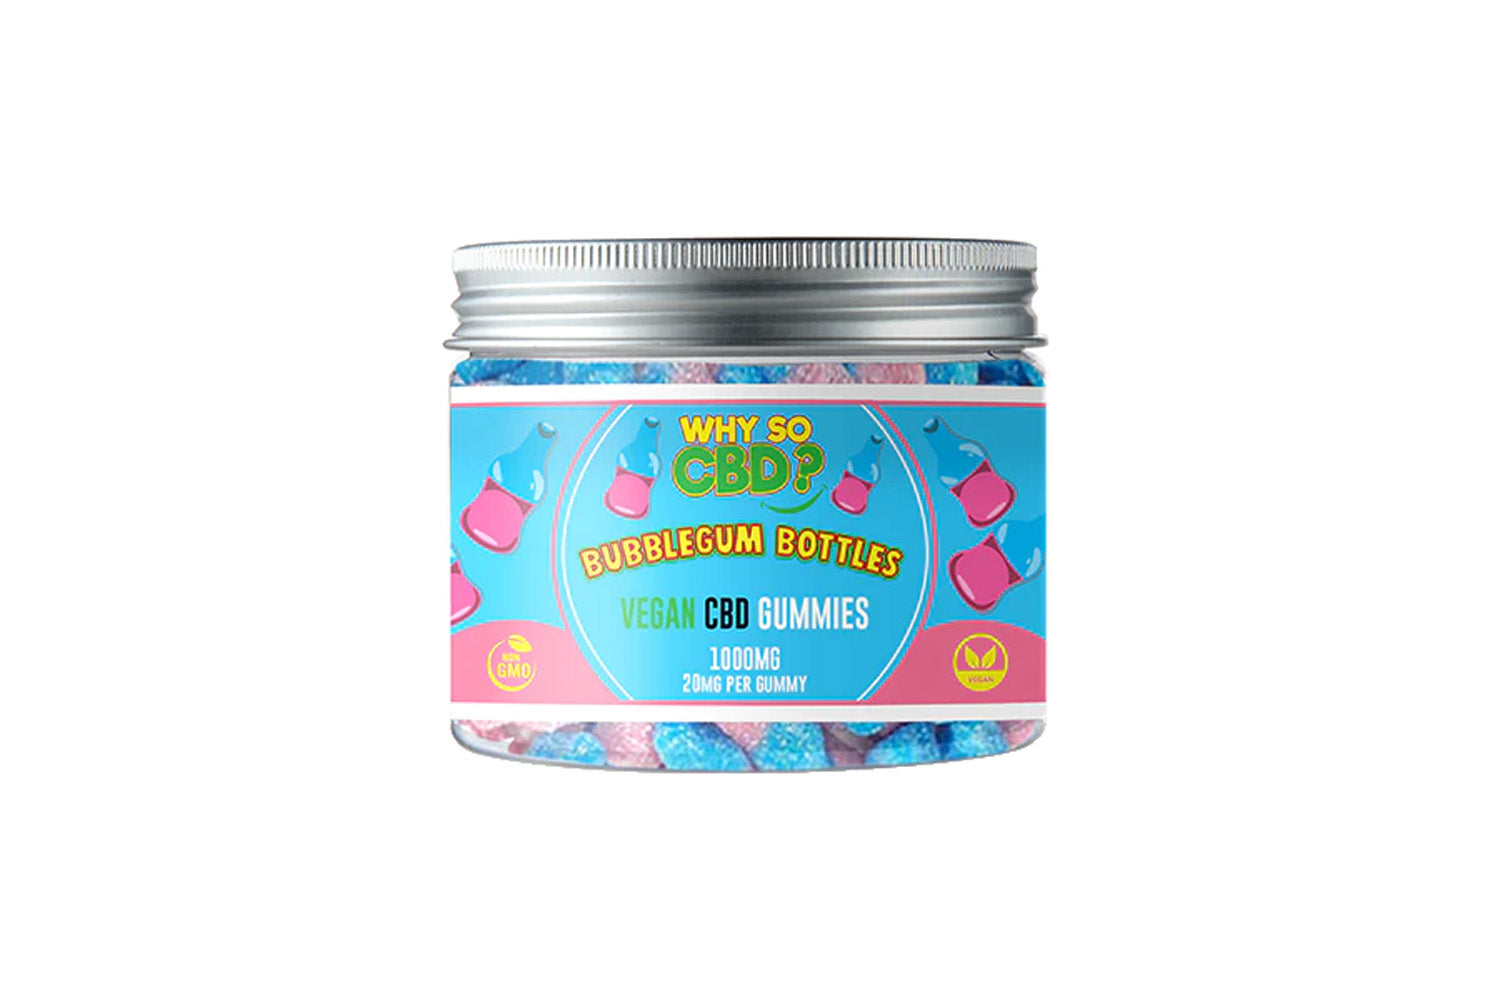 Product Of The Month: Why So CBD 1000mg CBD Gummies